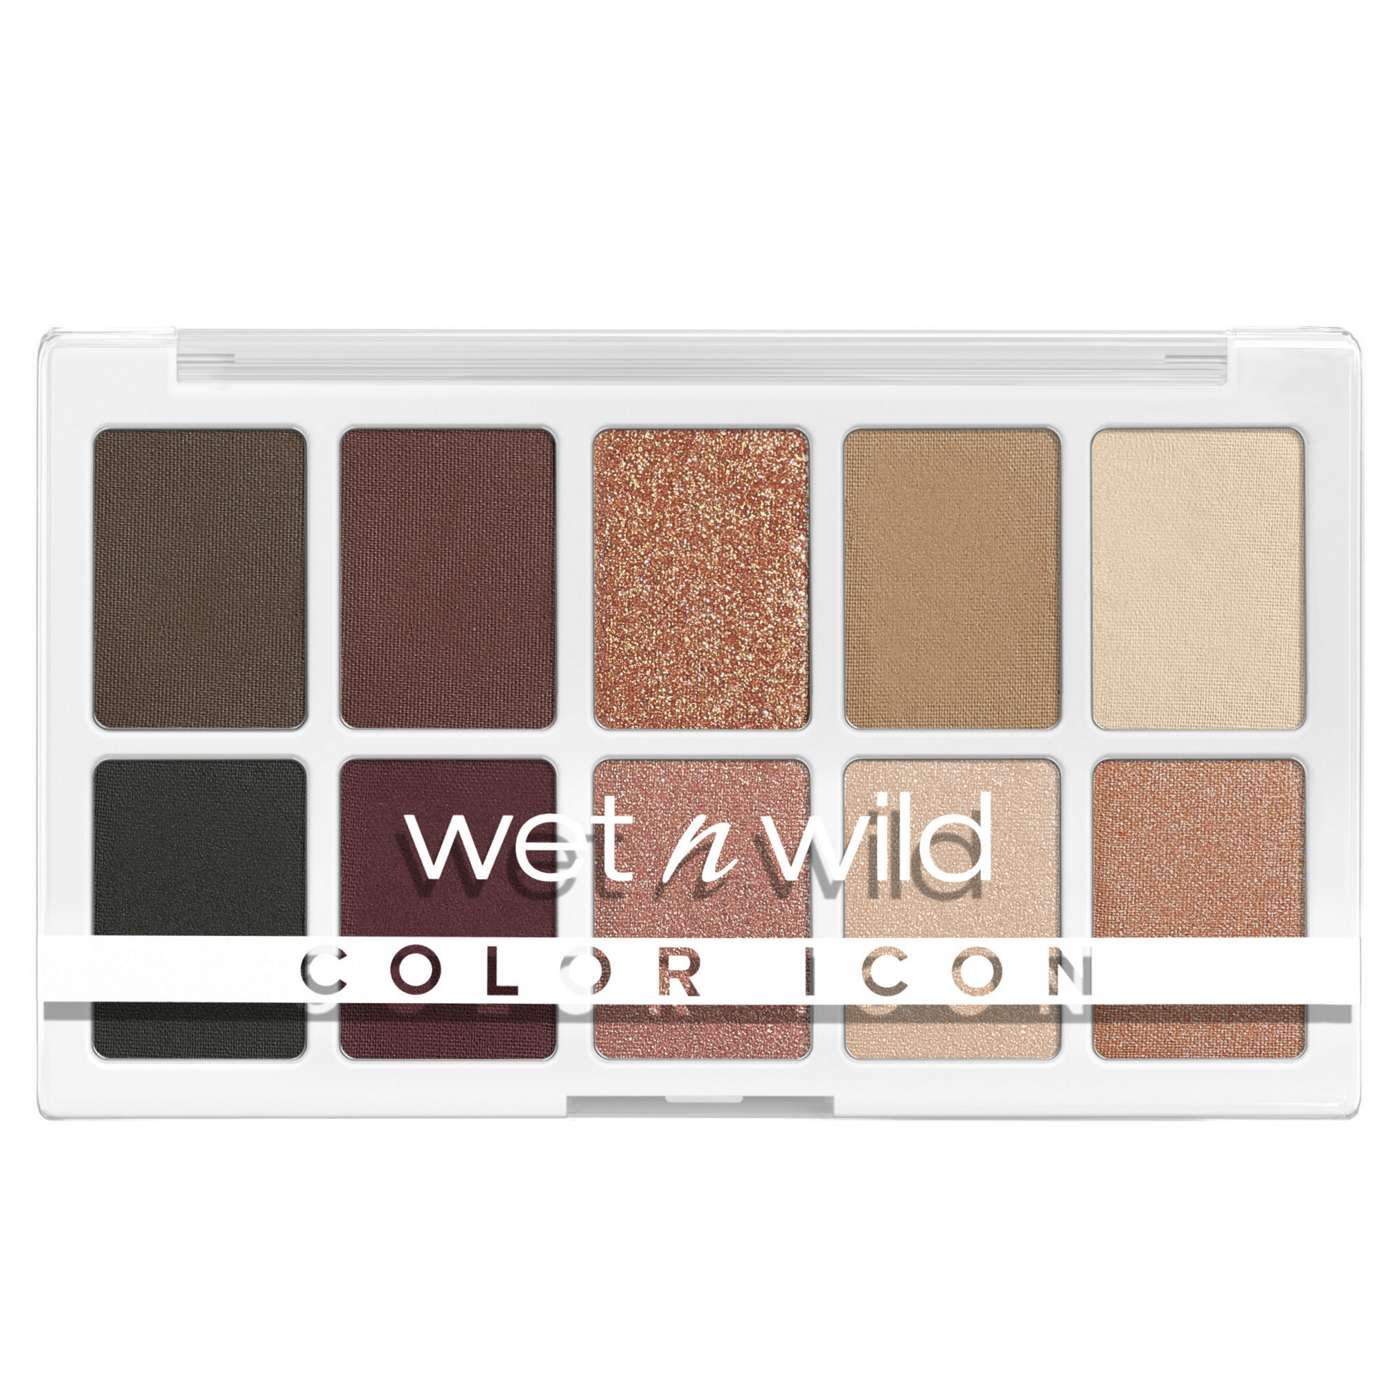 Wet n Wild Color Icon Eyeshadow Palette Nude; image 1 of 2